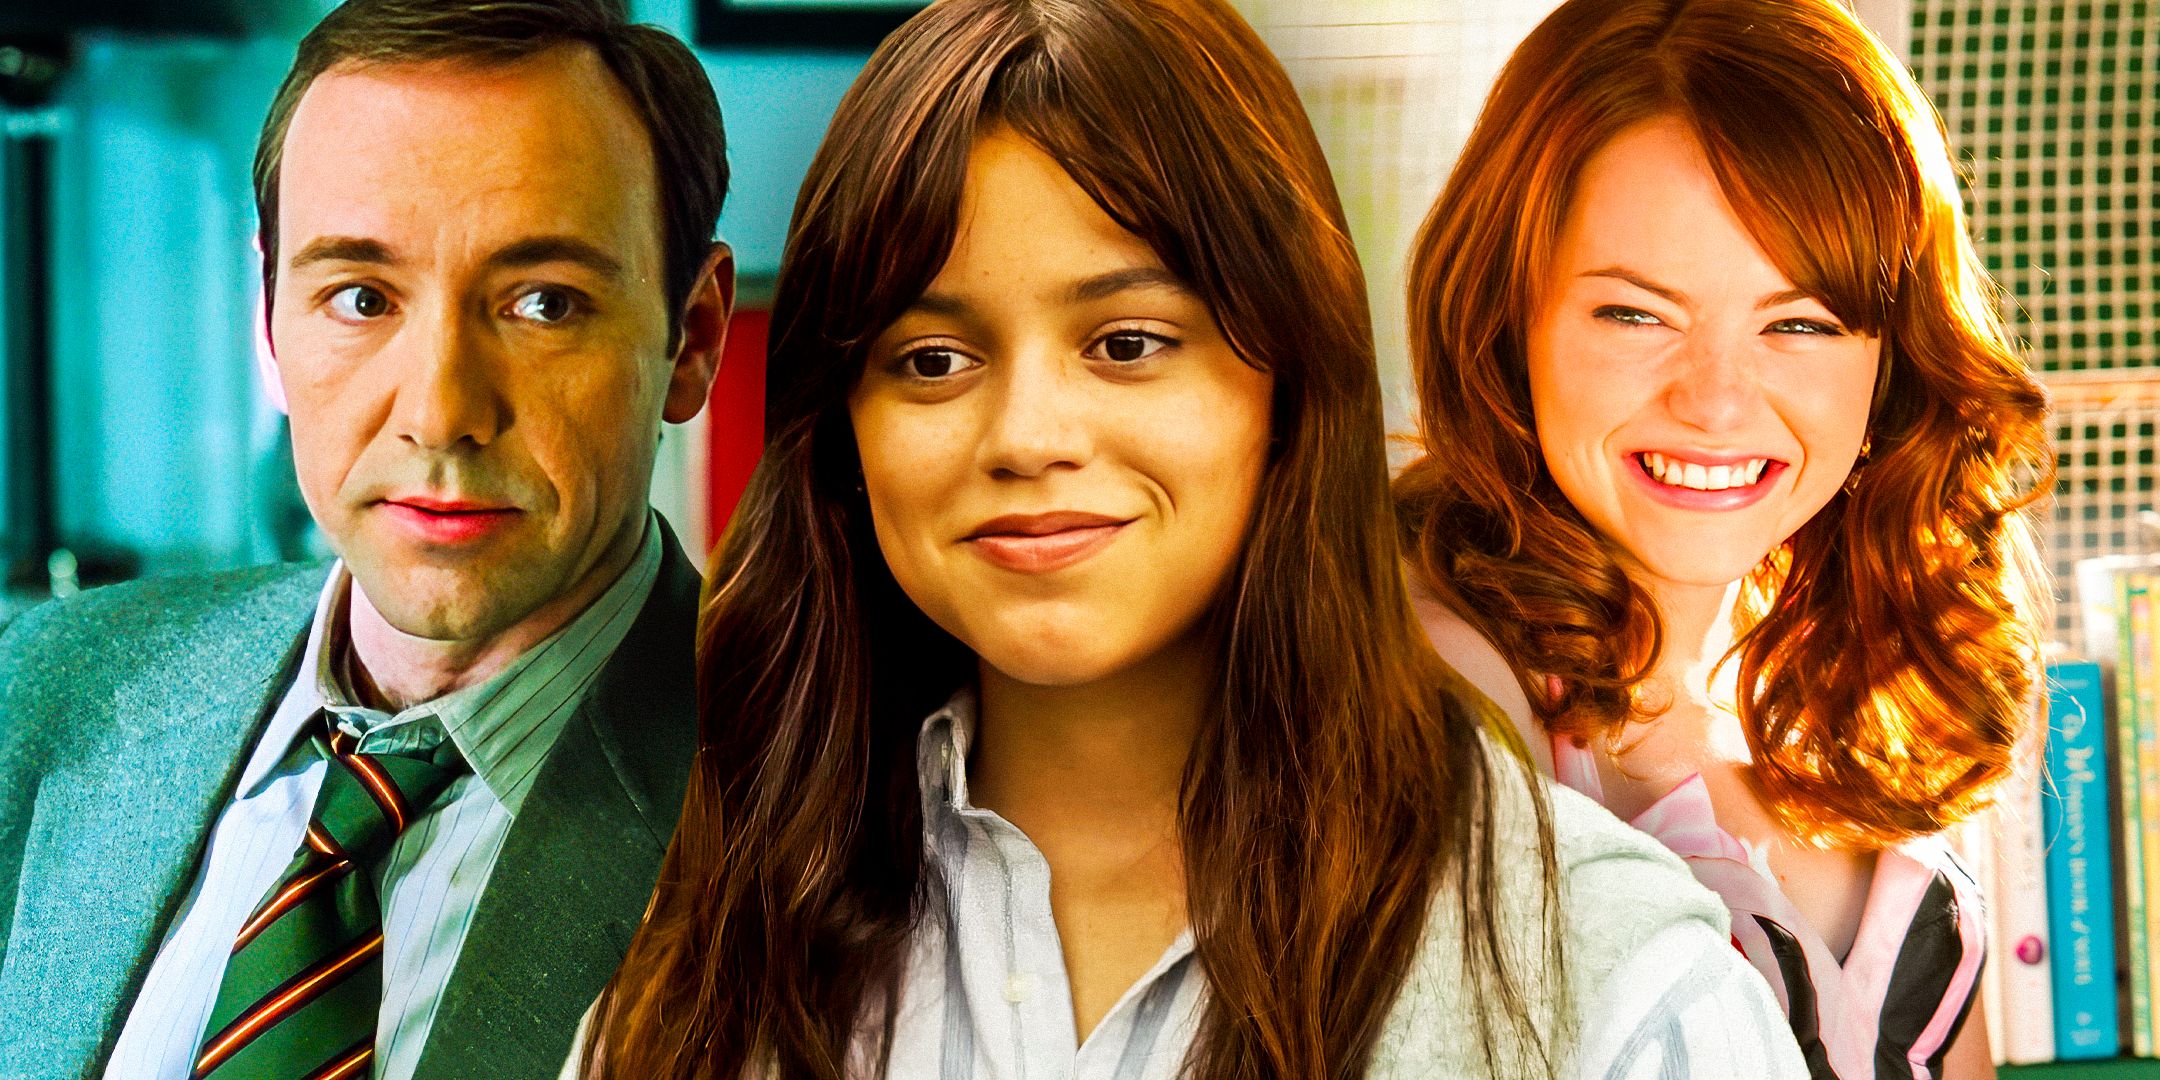 10 Movies Like Millers Girl To Watch After Jenna Ortega's Thriller